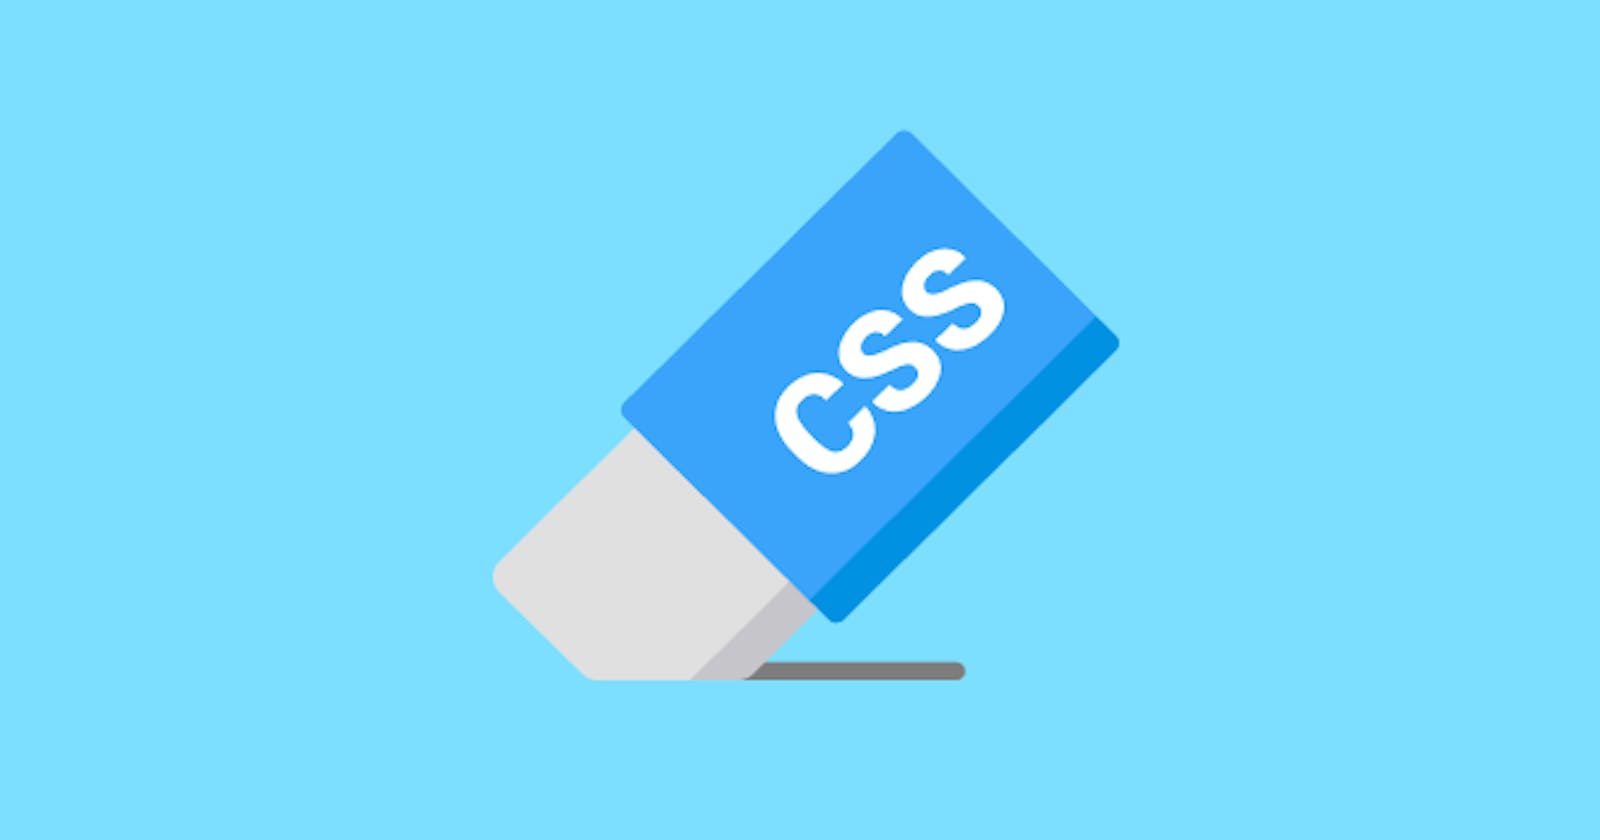 Reset in CSS